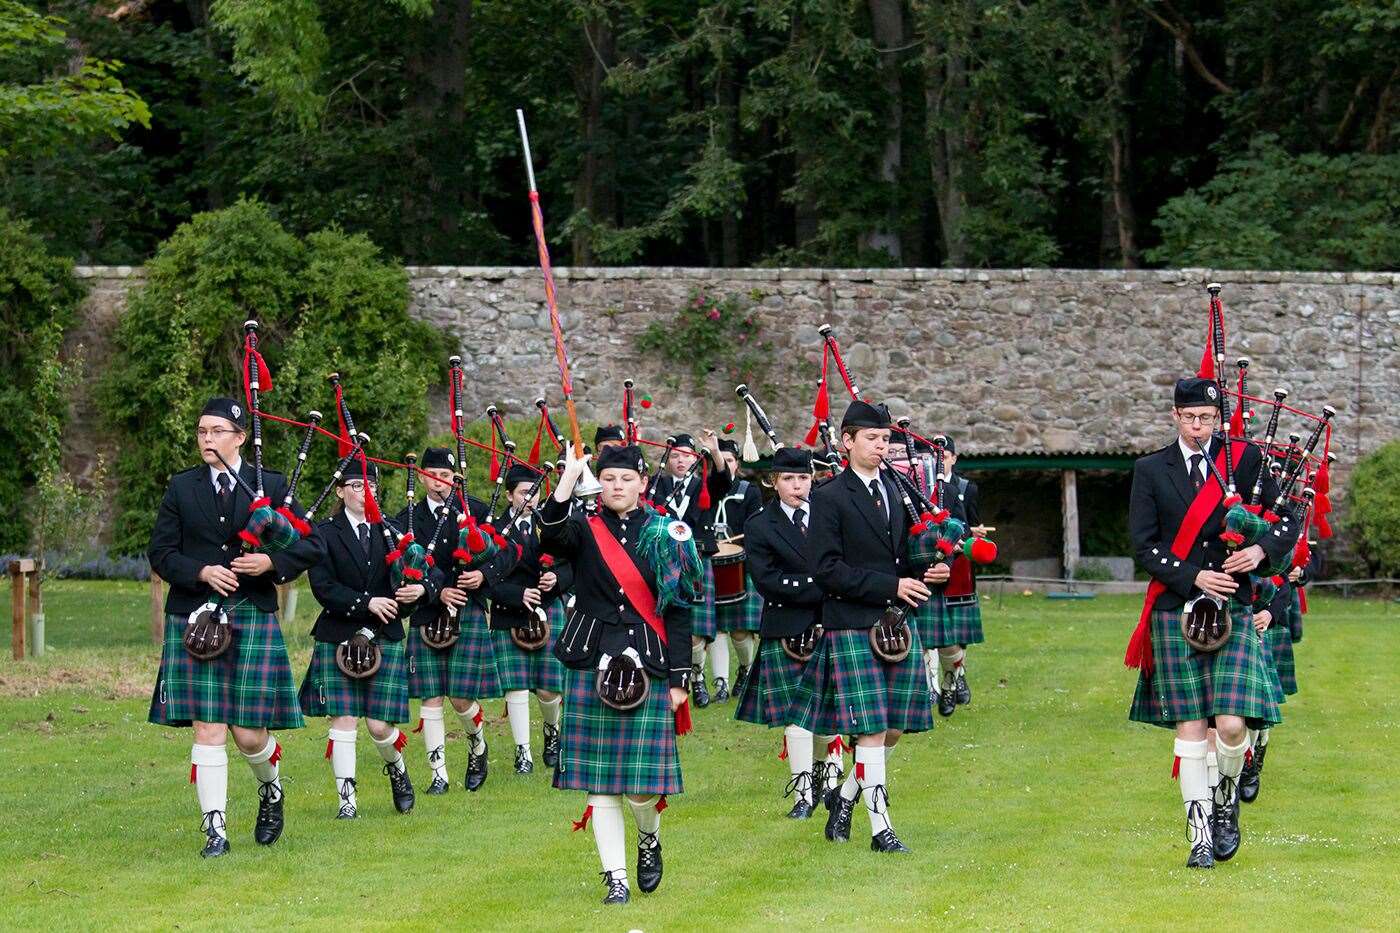 A pipe band performs in the gardens of Dunrobin Castle.